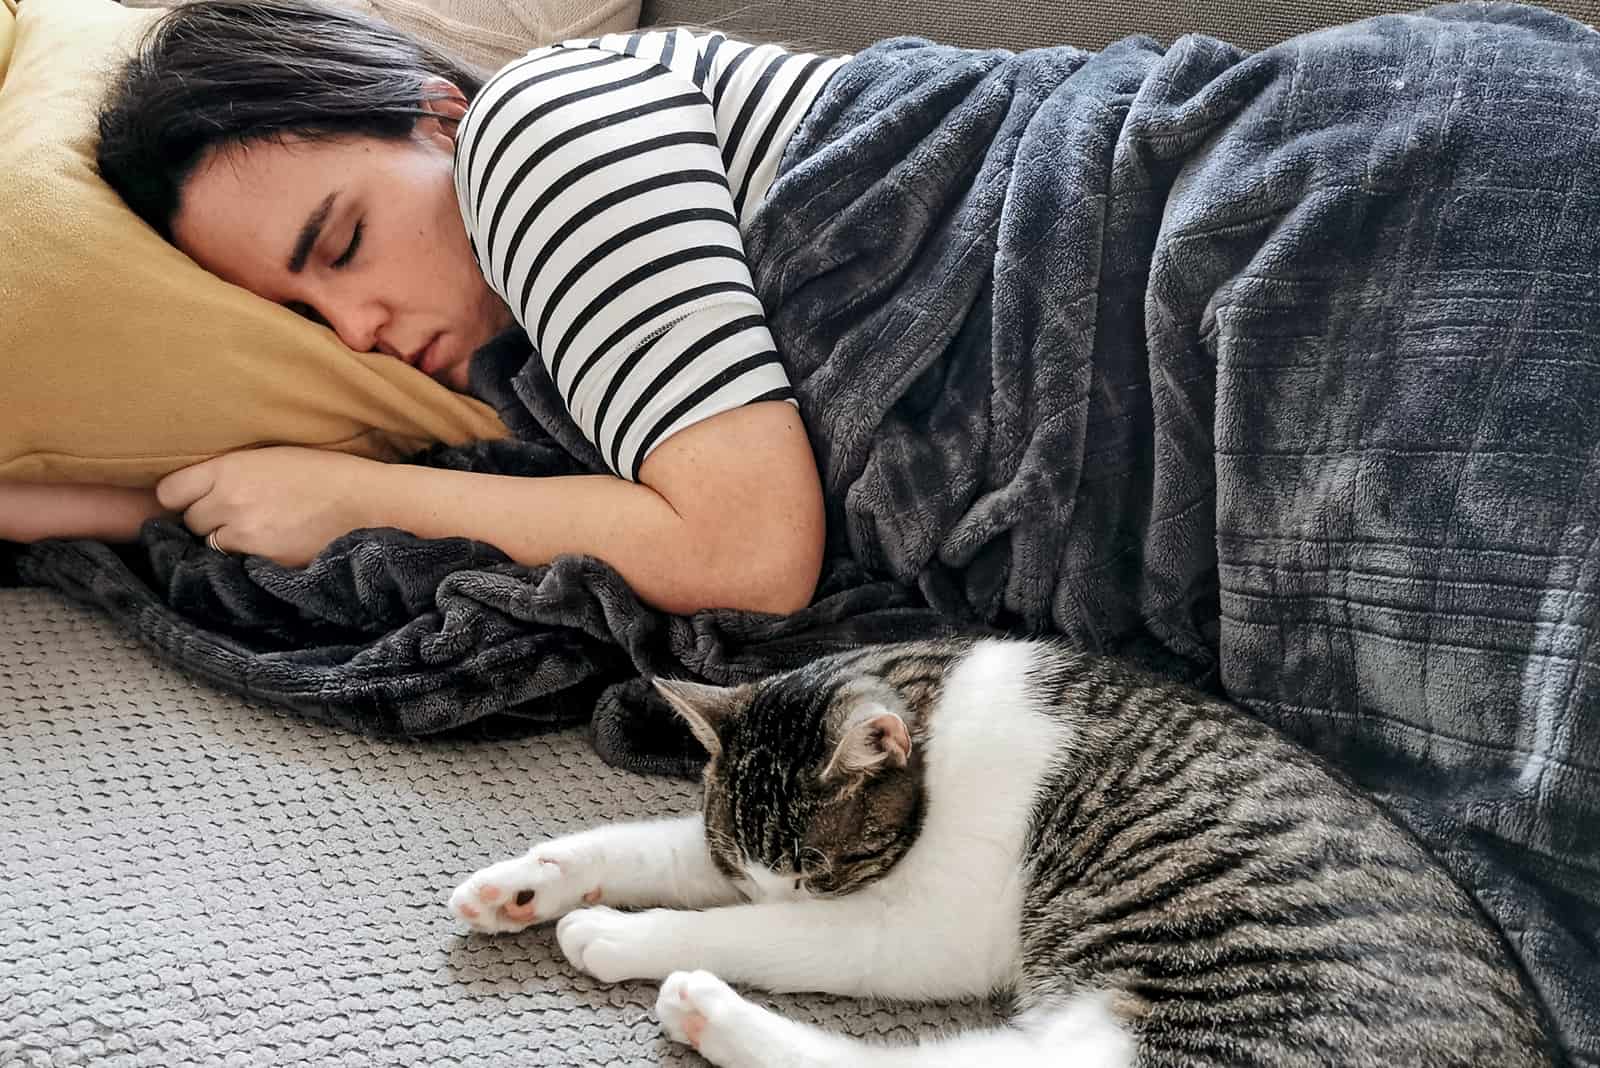 a beautiful woman sleeps together with a cat on the bed